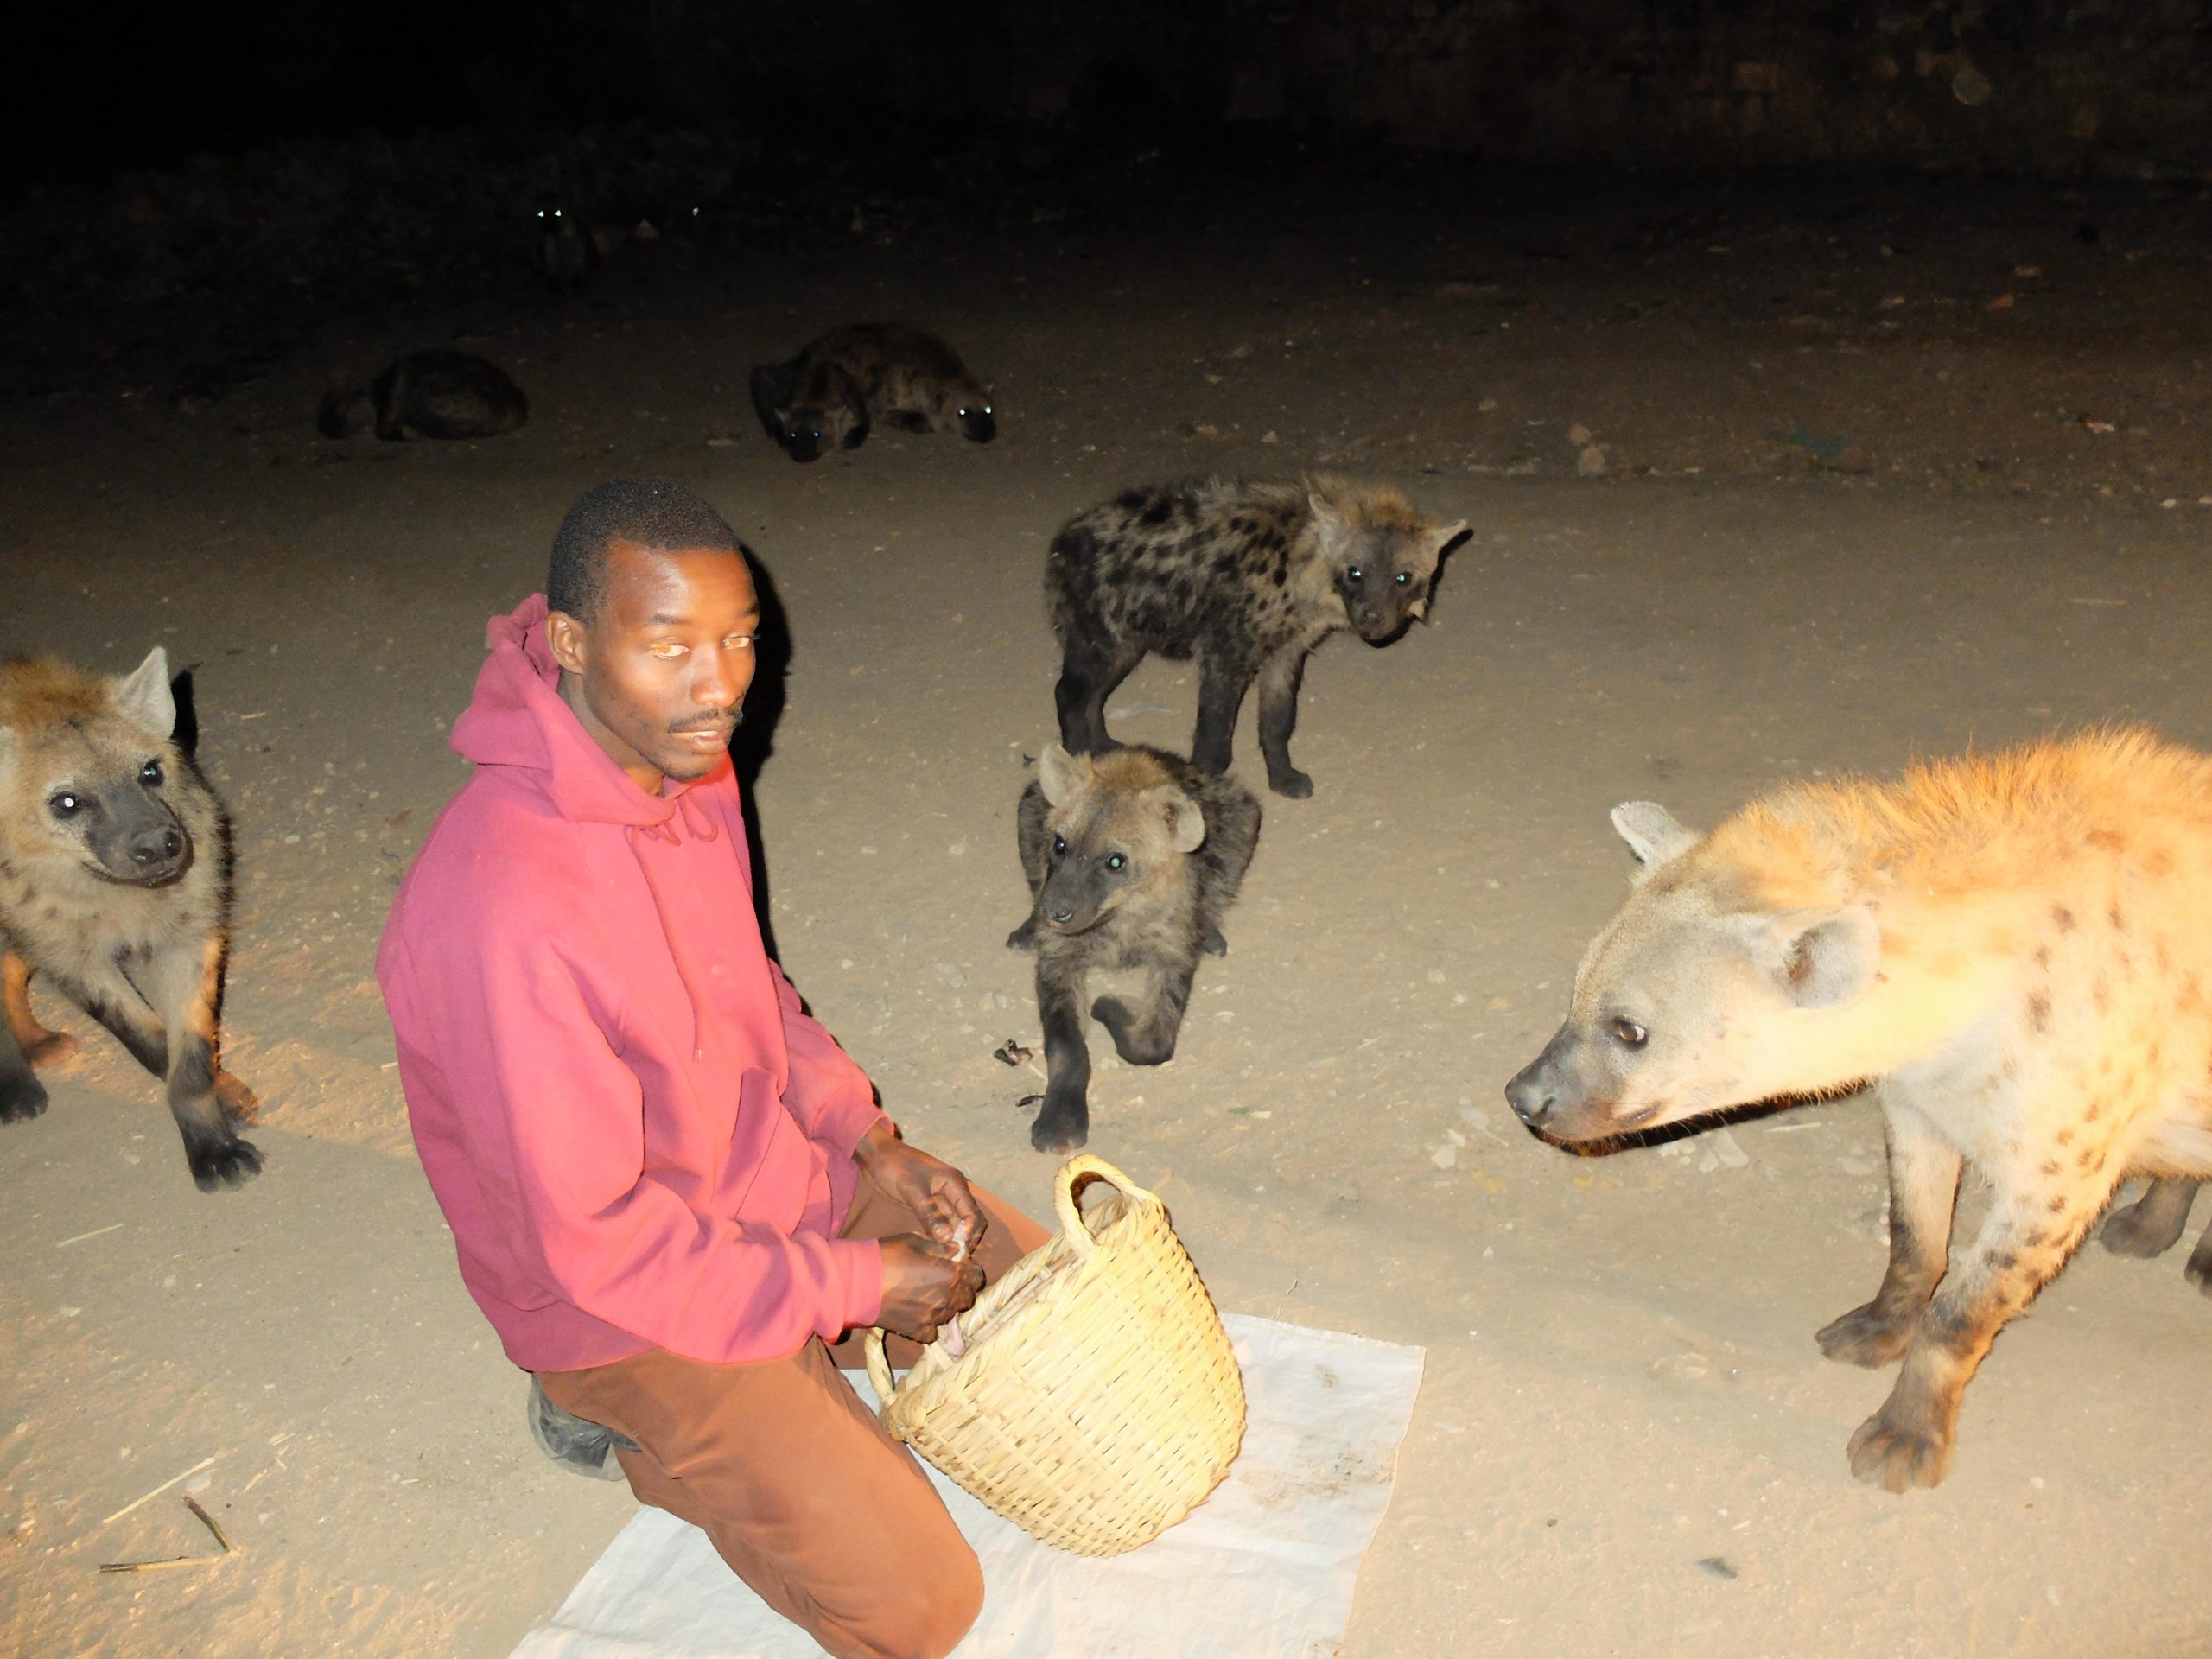 Hyenas, Coffee, And Qat - The City Of Harrar In Ethiopia Offers Much To Delight